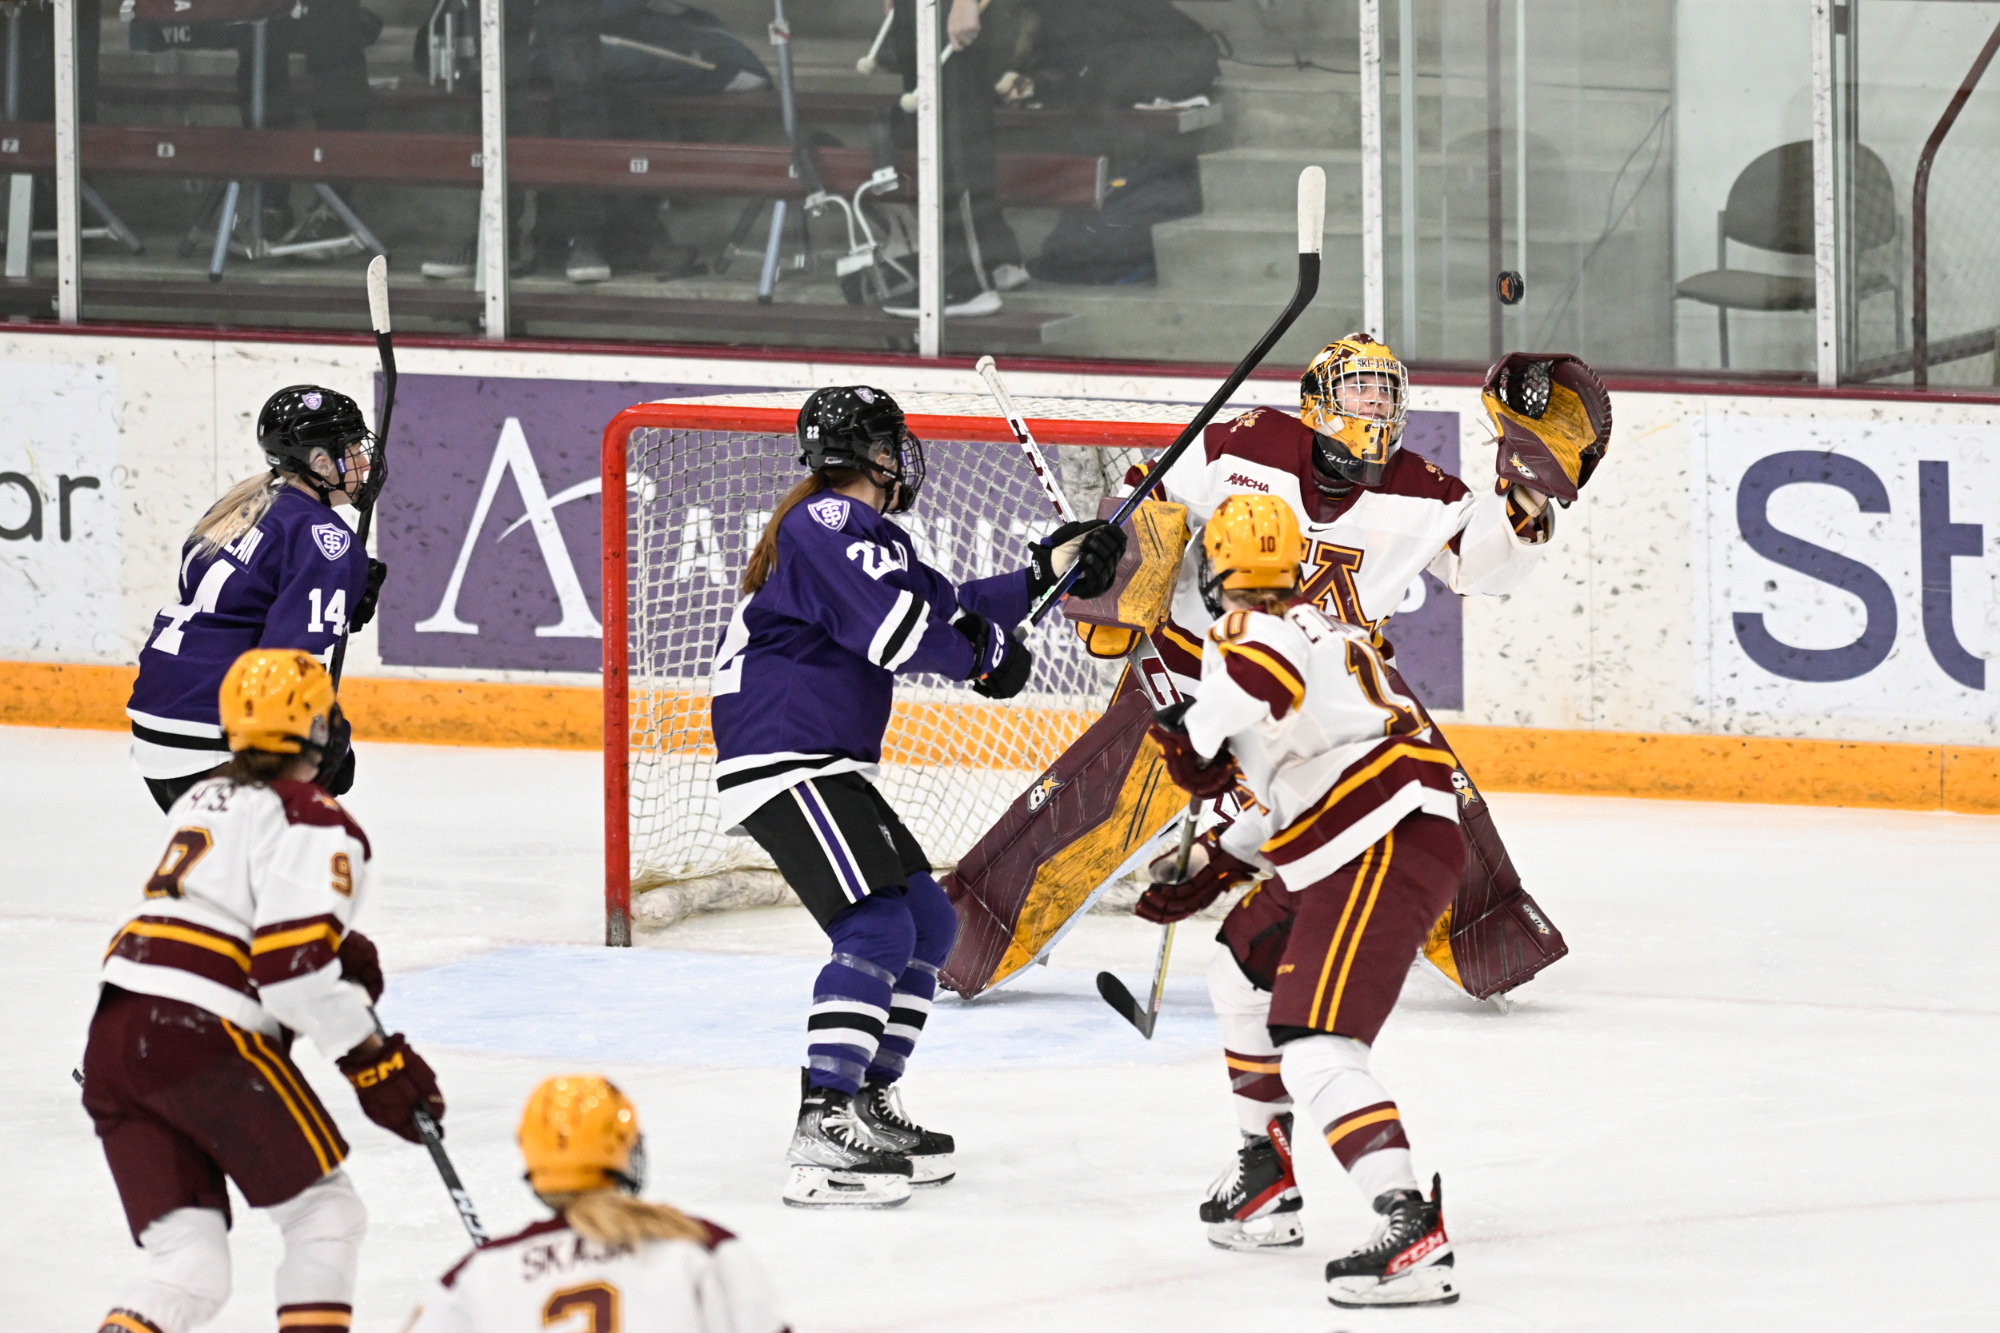 Tommies-Gophers set for hockey doubleheader at Xcel Energy Center in October